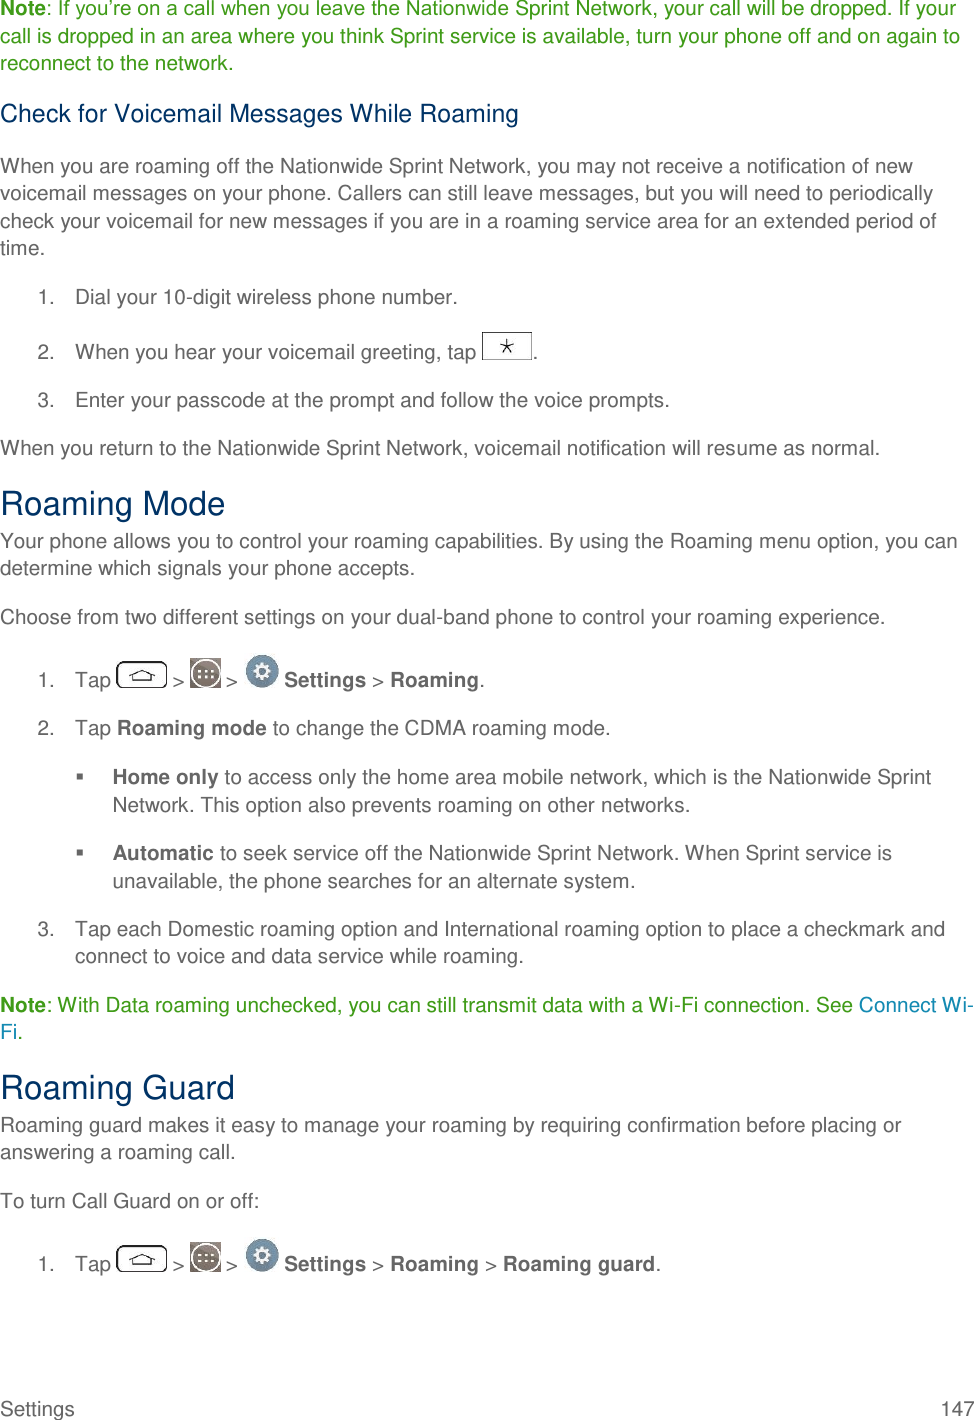 Settings  147 Note: If you‘re on a call when you leave the Nationwide Sprint Network, your call will be dropped. If your call is dropped in an area where you think Sprint service is available, turn your phone off and on again to reconnect to the network. Check for Voicemail Messages While Roaming When you are roaming off the Nationwide Sprint Network, you may not receive a notification of new voicemail messages on your phone. Callers can still leave messages, but you will need to periodically check your voicemail for new messages if you are in a roaming service area for an extended period of time. 1.  Dial your 10-digit wireless phone number. 2.  When you hear your voicemail greeting, tap  . 3.  Enter your passcode at the prompt and follow the voice prompts. When you return to the Nationwide Sprint Network, voicemail notification will resume as normal. Roaming Mode Your phone allows you to control your roaming capabilities. By using the Roaming menu option, you can determine which signals your phone accepts. Choose from two different settings on your dual-band phone to control your roaming experience. 1.  Tap   &gt;   &gt;   Settings &gt; Roaming. 2.  Tap Roaming mode to change the CDMA roaming mode.  Home only to access only the home area mobile network, which is the Nationwide Sprint Network. This option also prevents roaming on other networks.  Automatic to seek service off the Nationwide Sprint Network. When Sprint service is unavailable, the phone searches for an alternate system. 3.  Tap each Domestic roaming option and International roaming option to place a checkmark and connect to voice and data service while roaming.  Note: With Data roaming unchecked, you can still transmit data with a Wi-Fi connection. See Connect Wi-Fi. Roaming Guard Roaming guard makes it easy to manage your roaming by requiring confirmation before placing or answering a roaming call. To turn Call Guard on or off: 1.  Tap   &gt;   &gt;   Settings &gt; Roaming &gt; Roaming guard. 